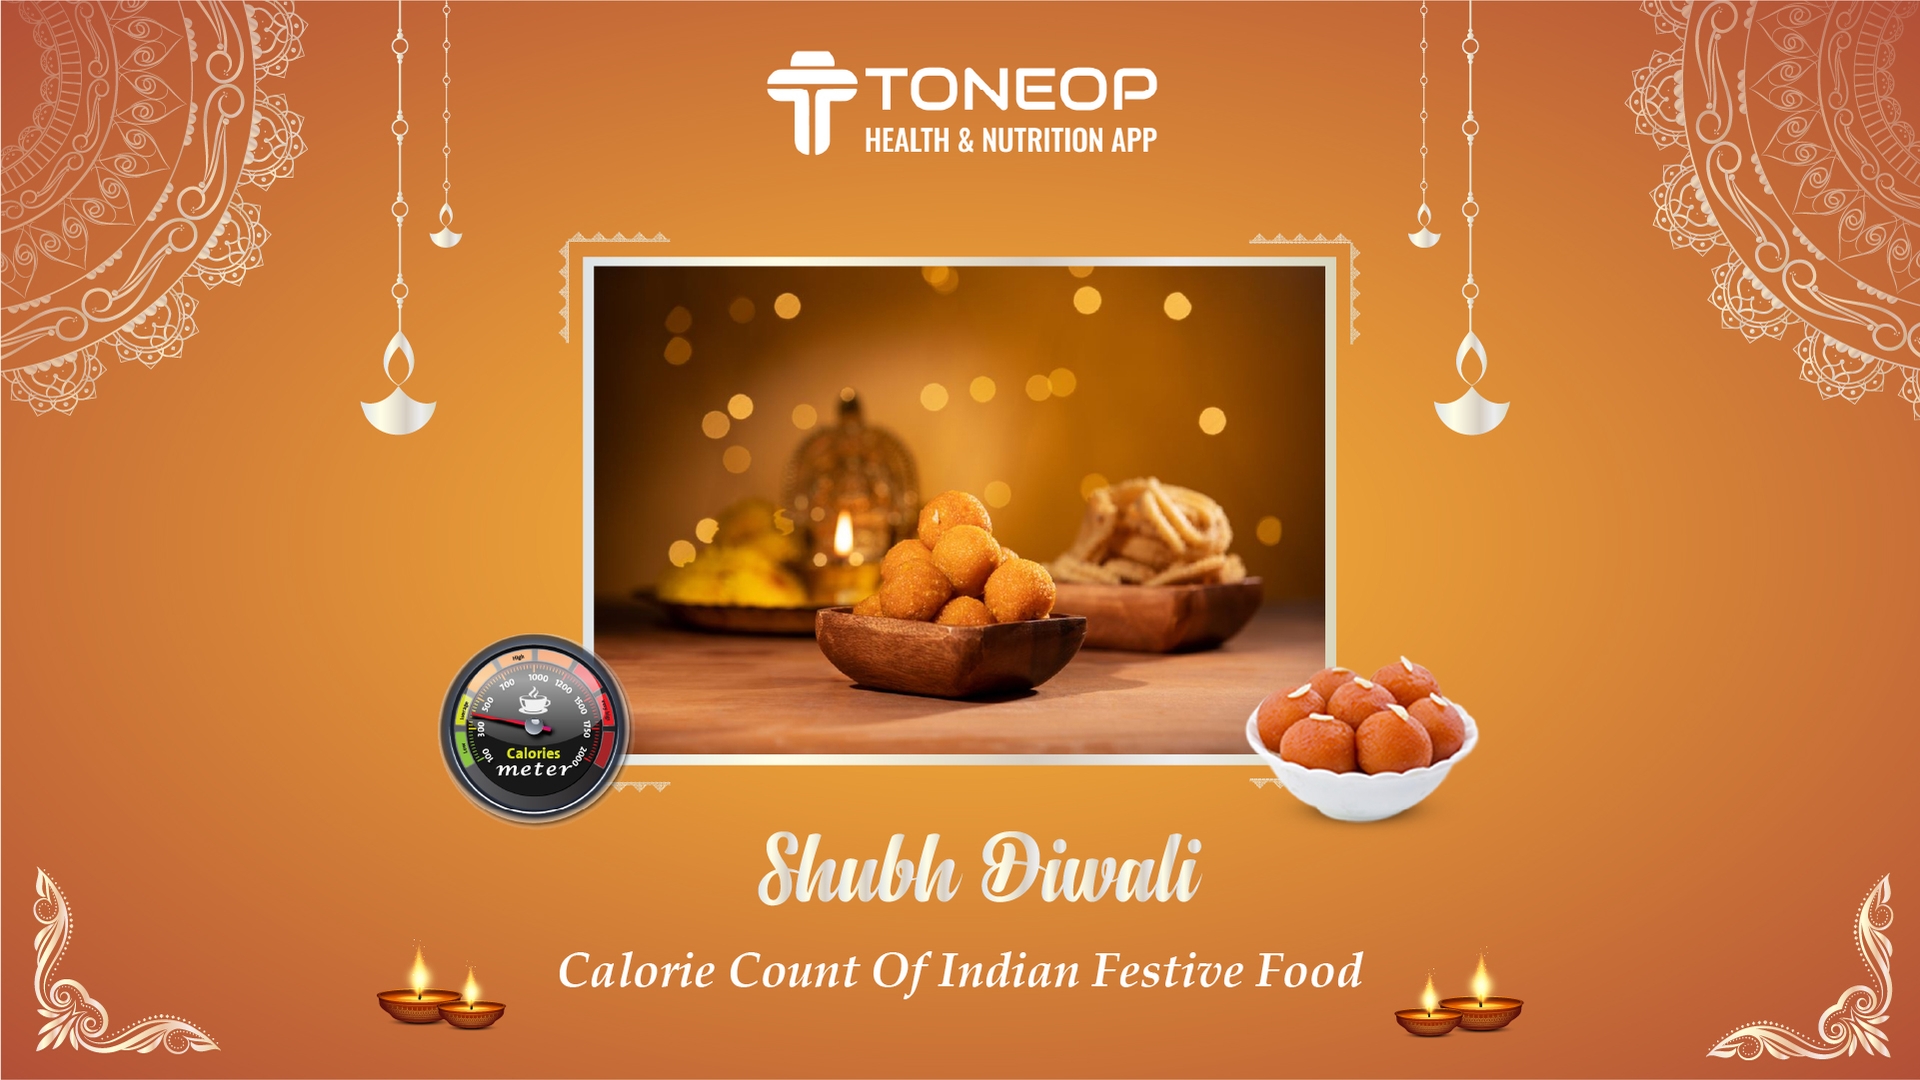 Shubh Diwali: Calorie Count Of Indian Festive Food